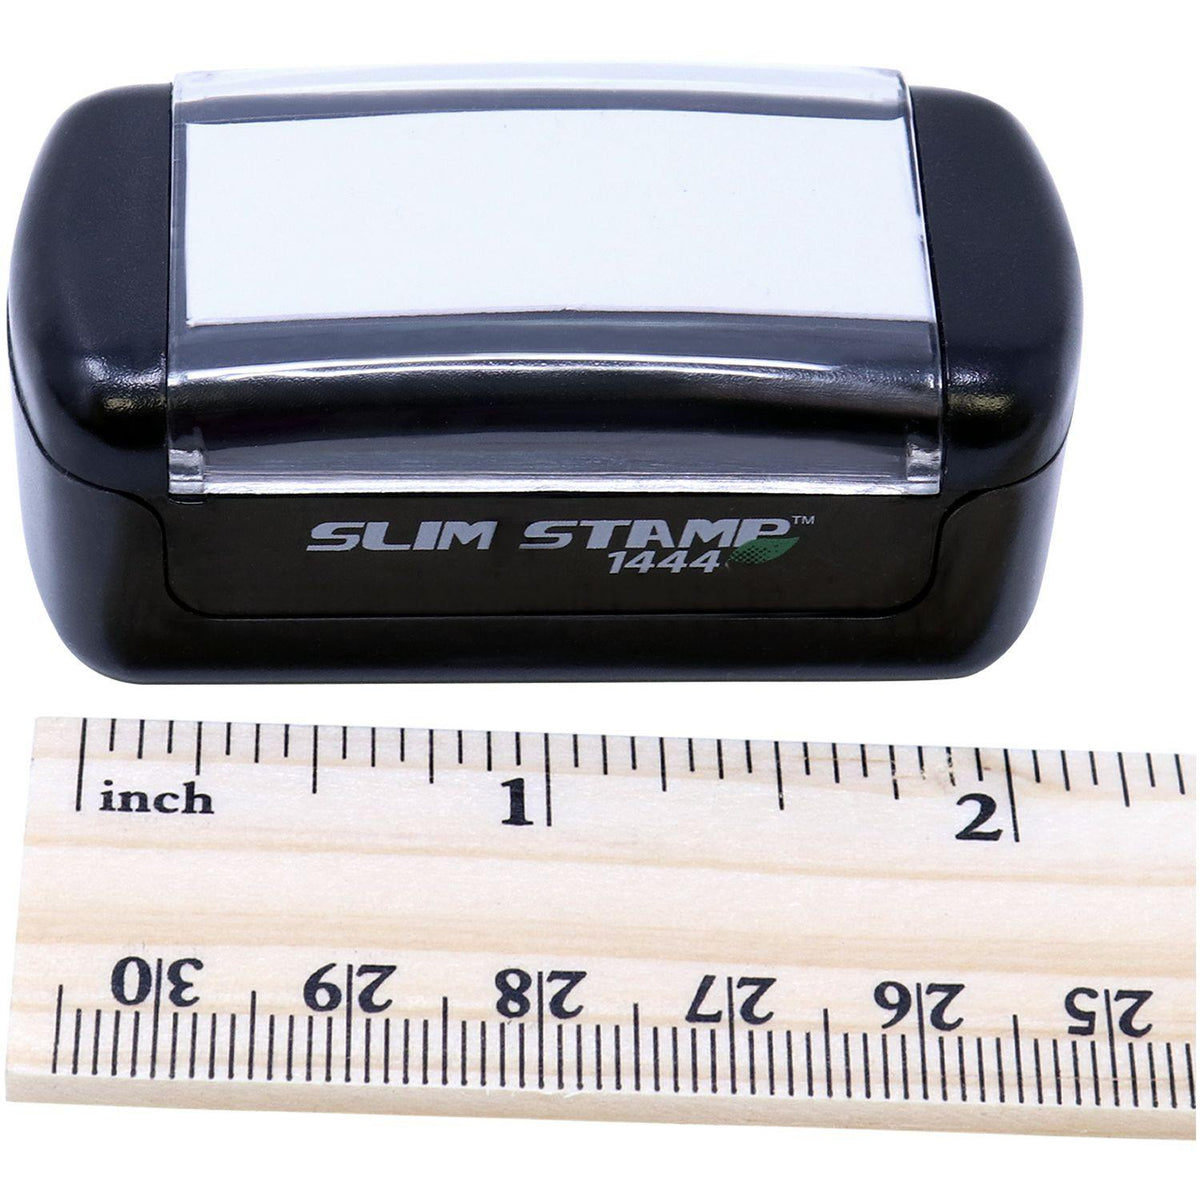 Measurement Slim Pre-Inked Extra Credit Stamp with Ruler